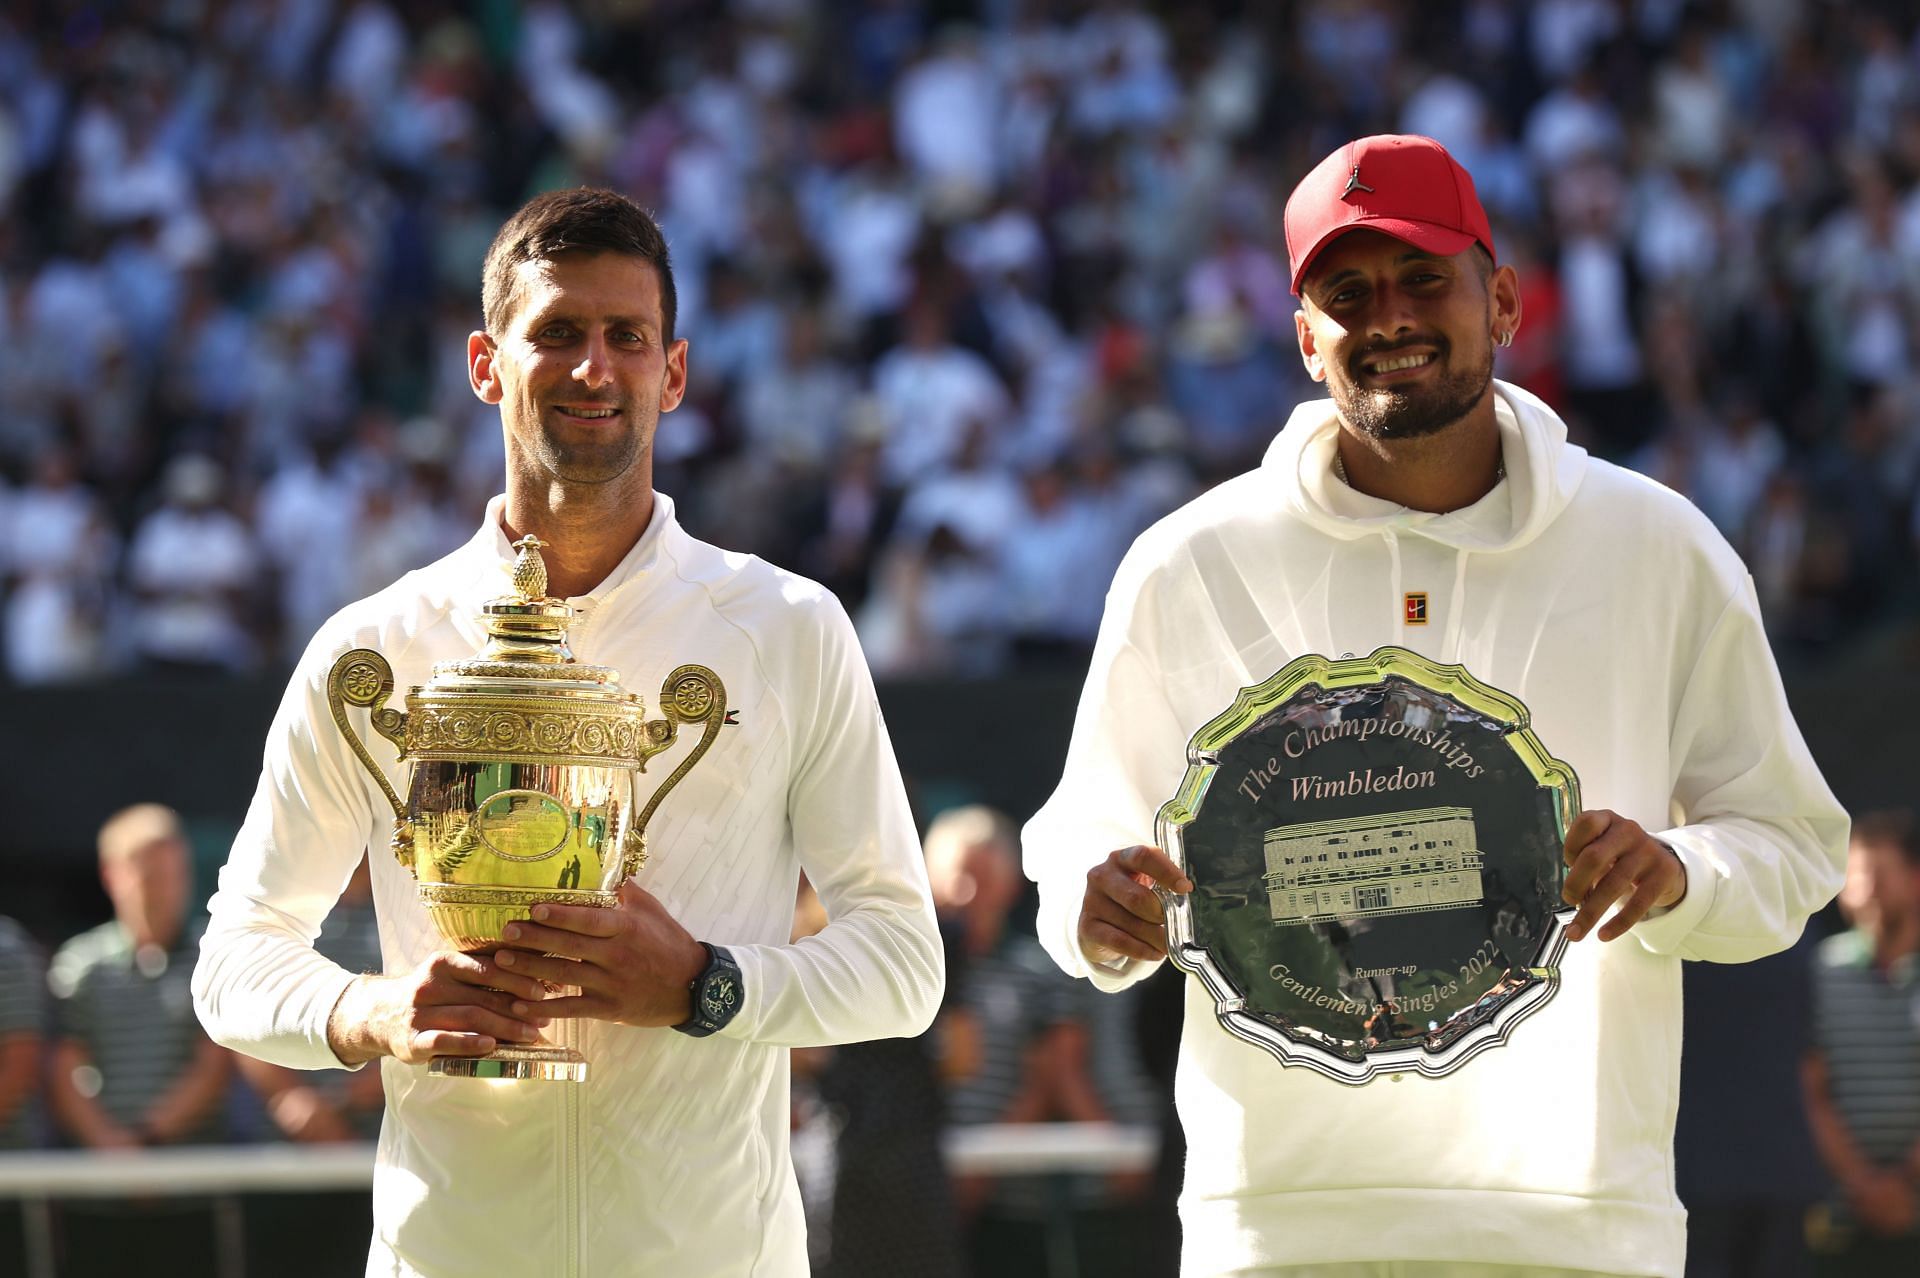 Nick Kyrgios (right) on Day Fourteen: The Championships - Wimbledon 2022